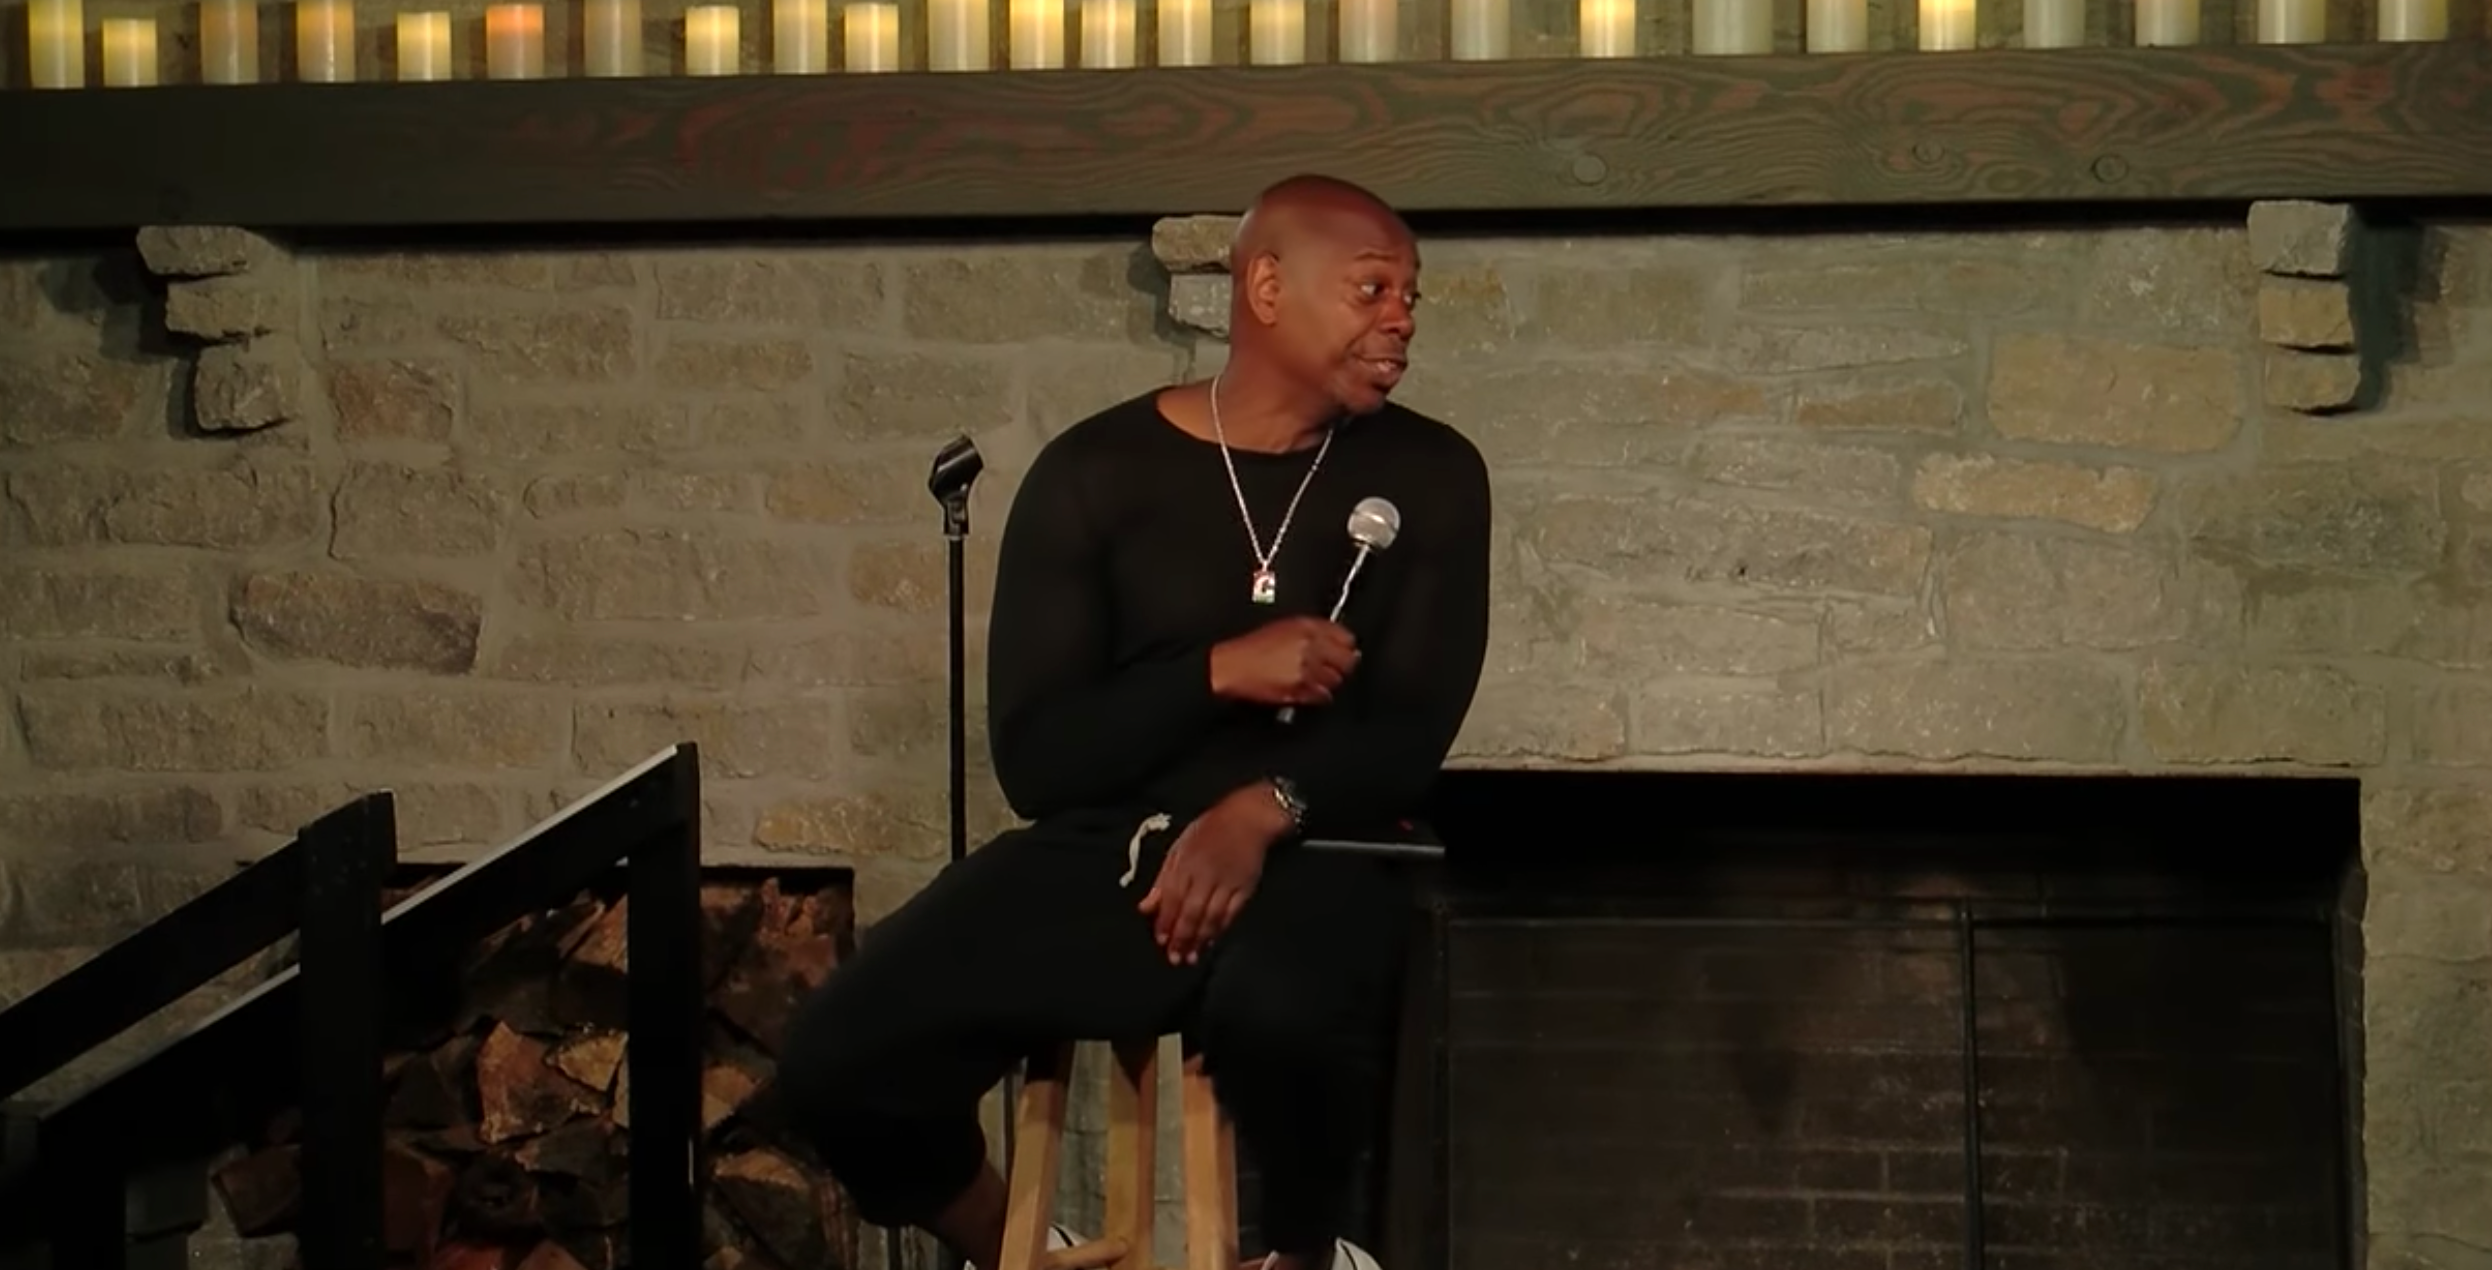 NEW! 8:46 - Dave Chappelle